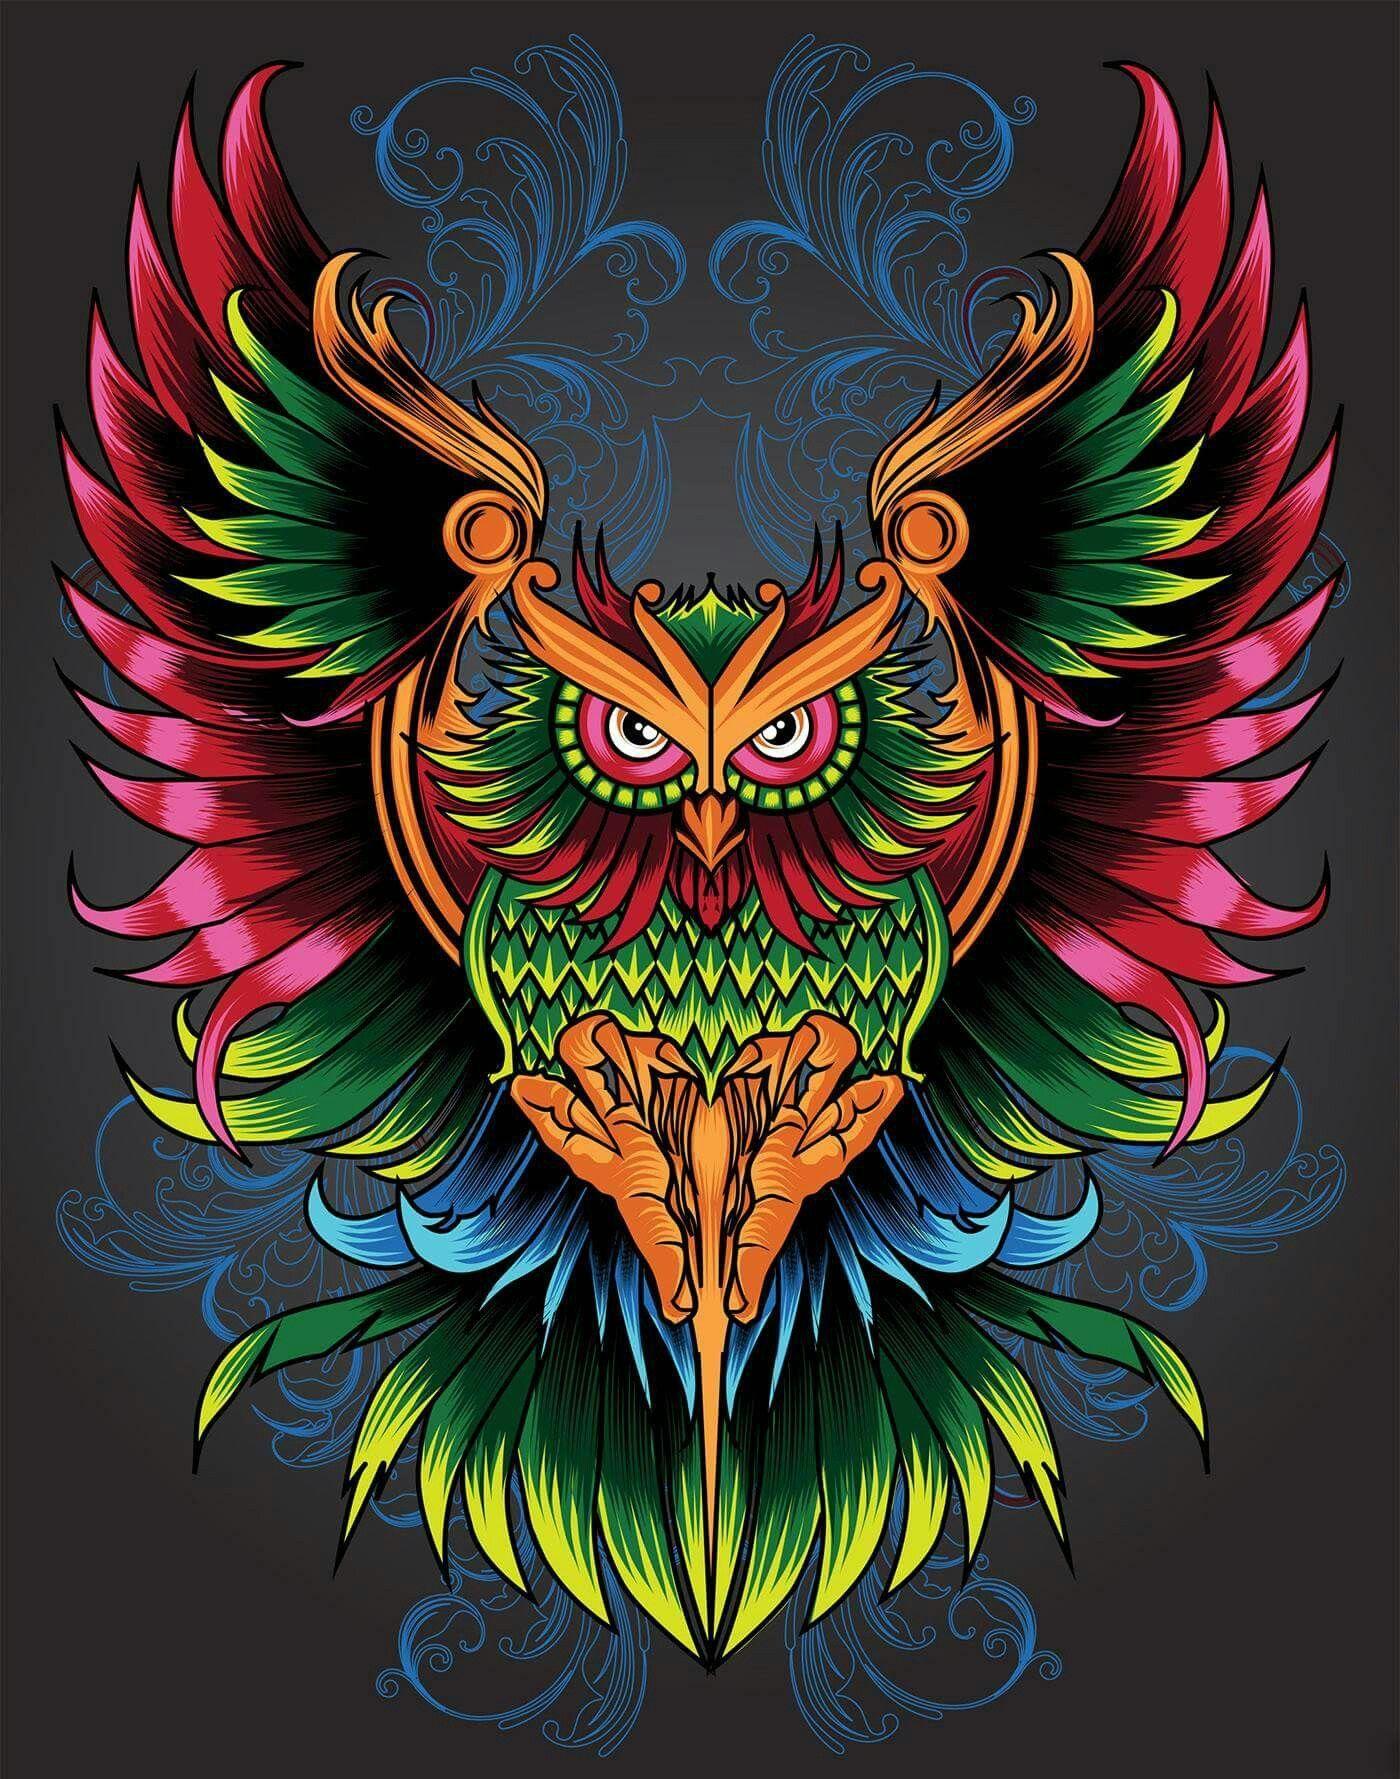 Colorful Owl Wallpapers Top Free Colorful Owl Backgrounds